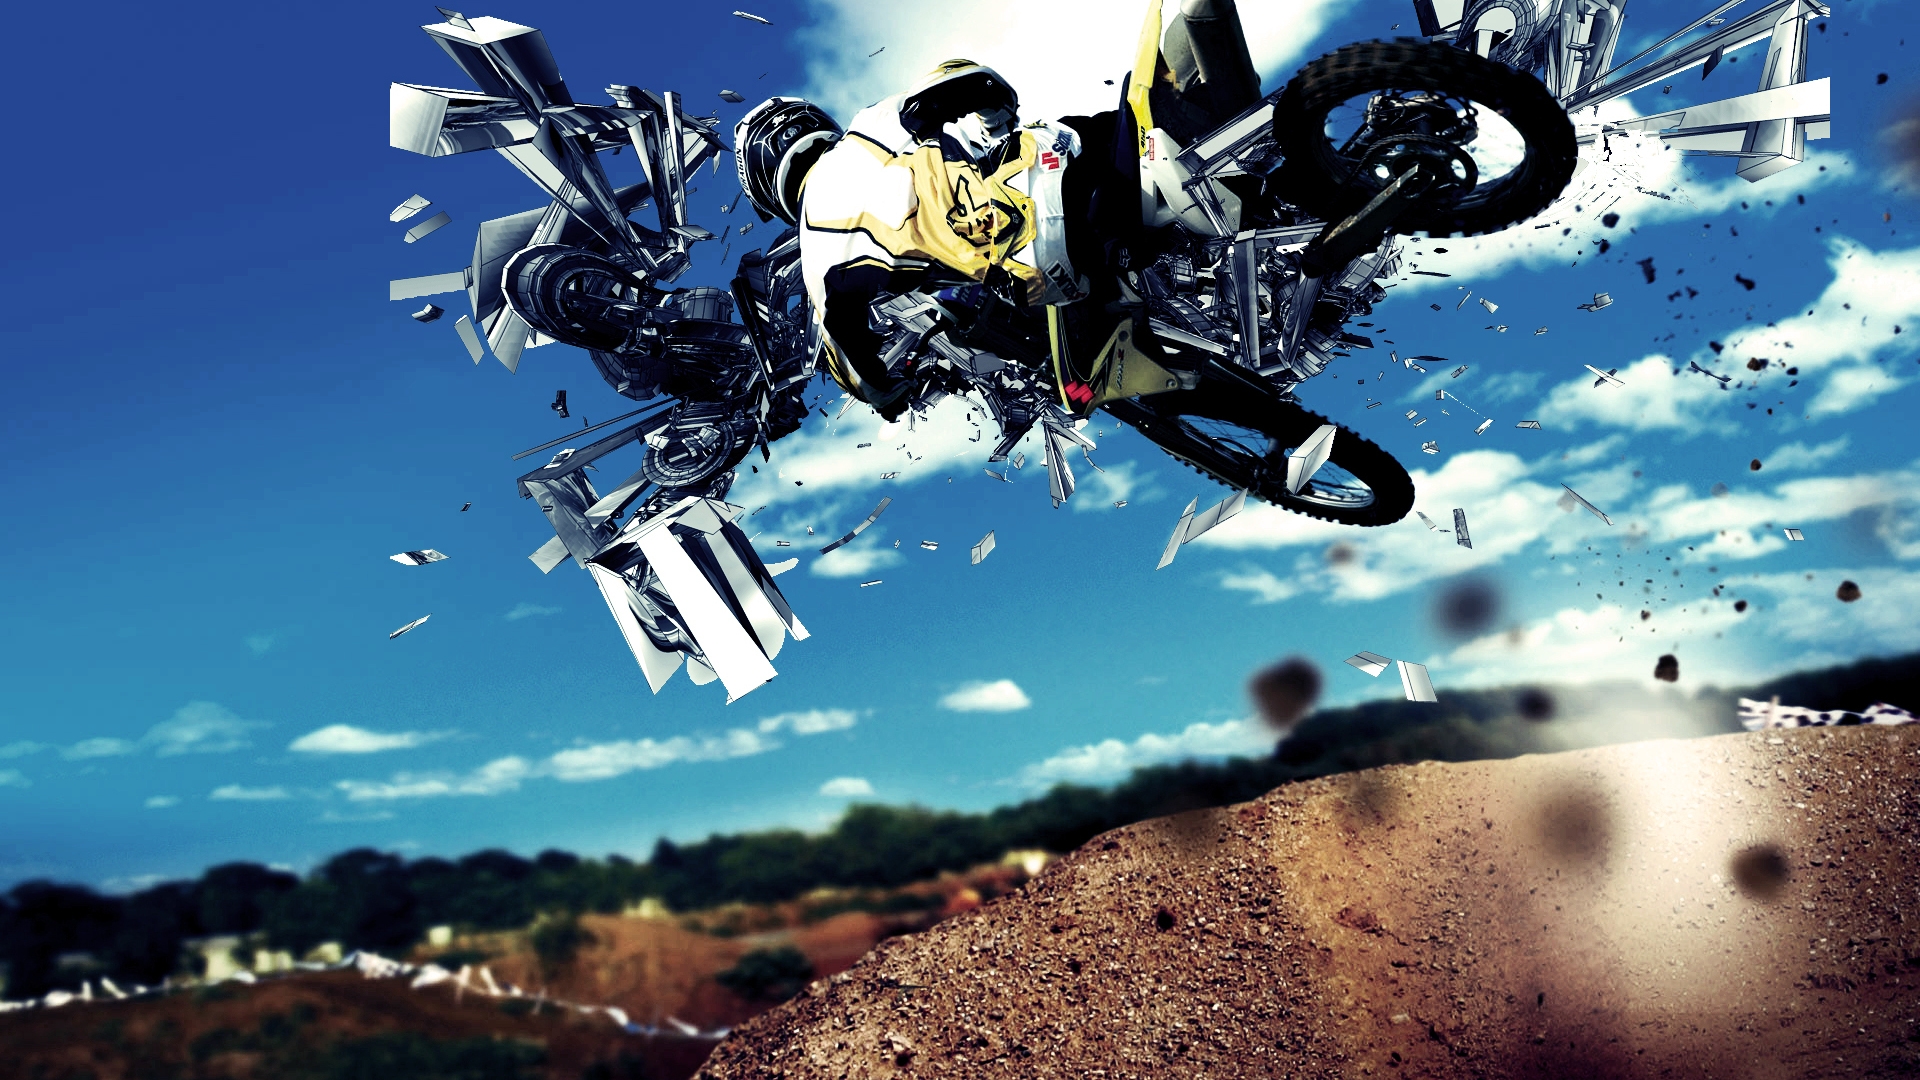 Motorcycle Race for 1920 x 1080 HDTV 1080p resolution